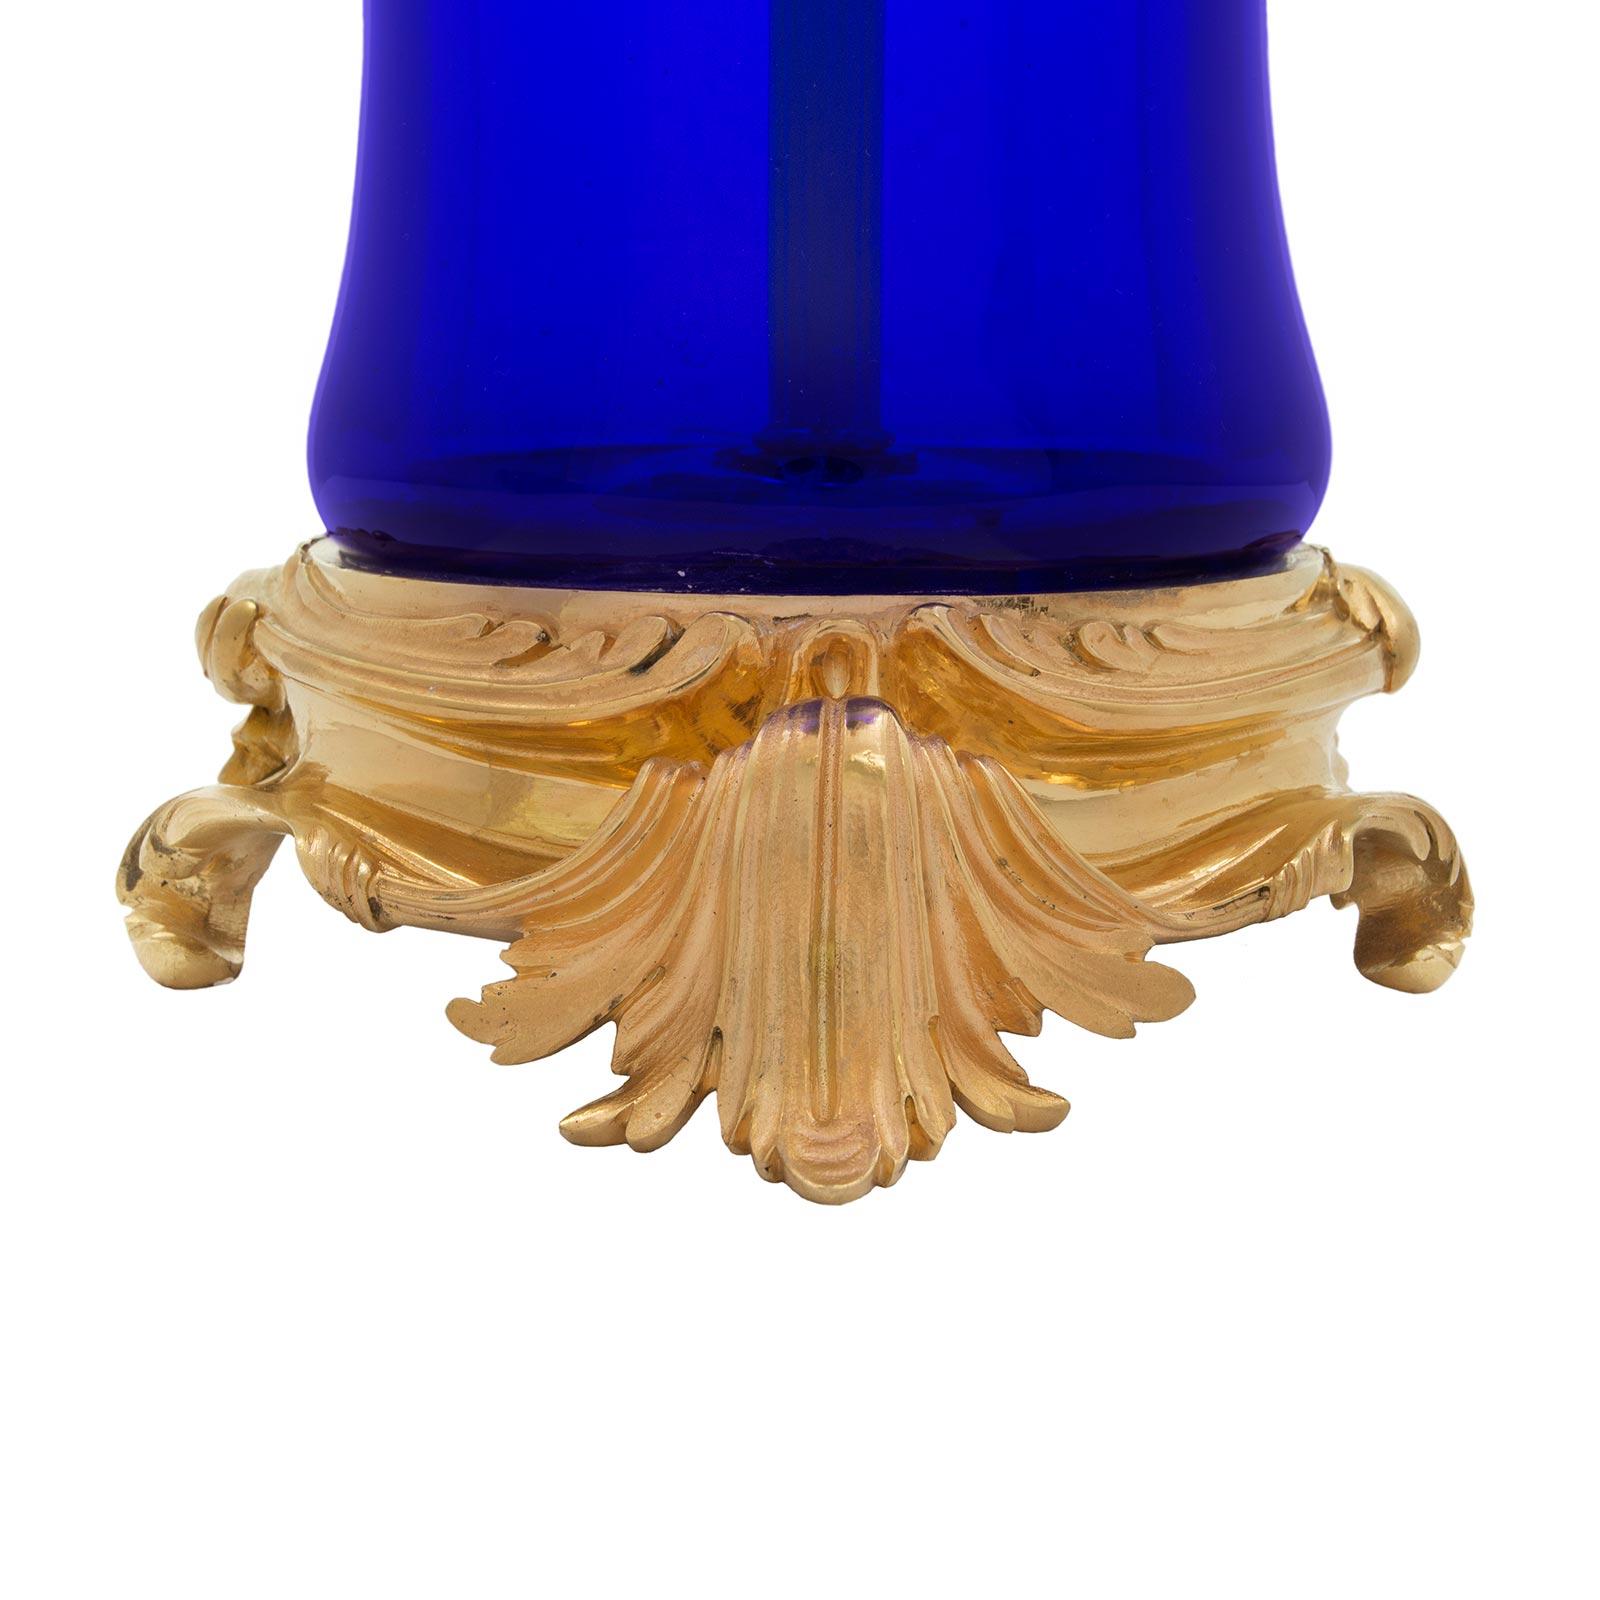 French 19th Century Louis XVI St. Blue Glass and Ormolu Candelabra Lamp For Sale 2